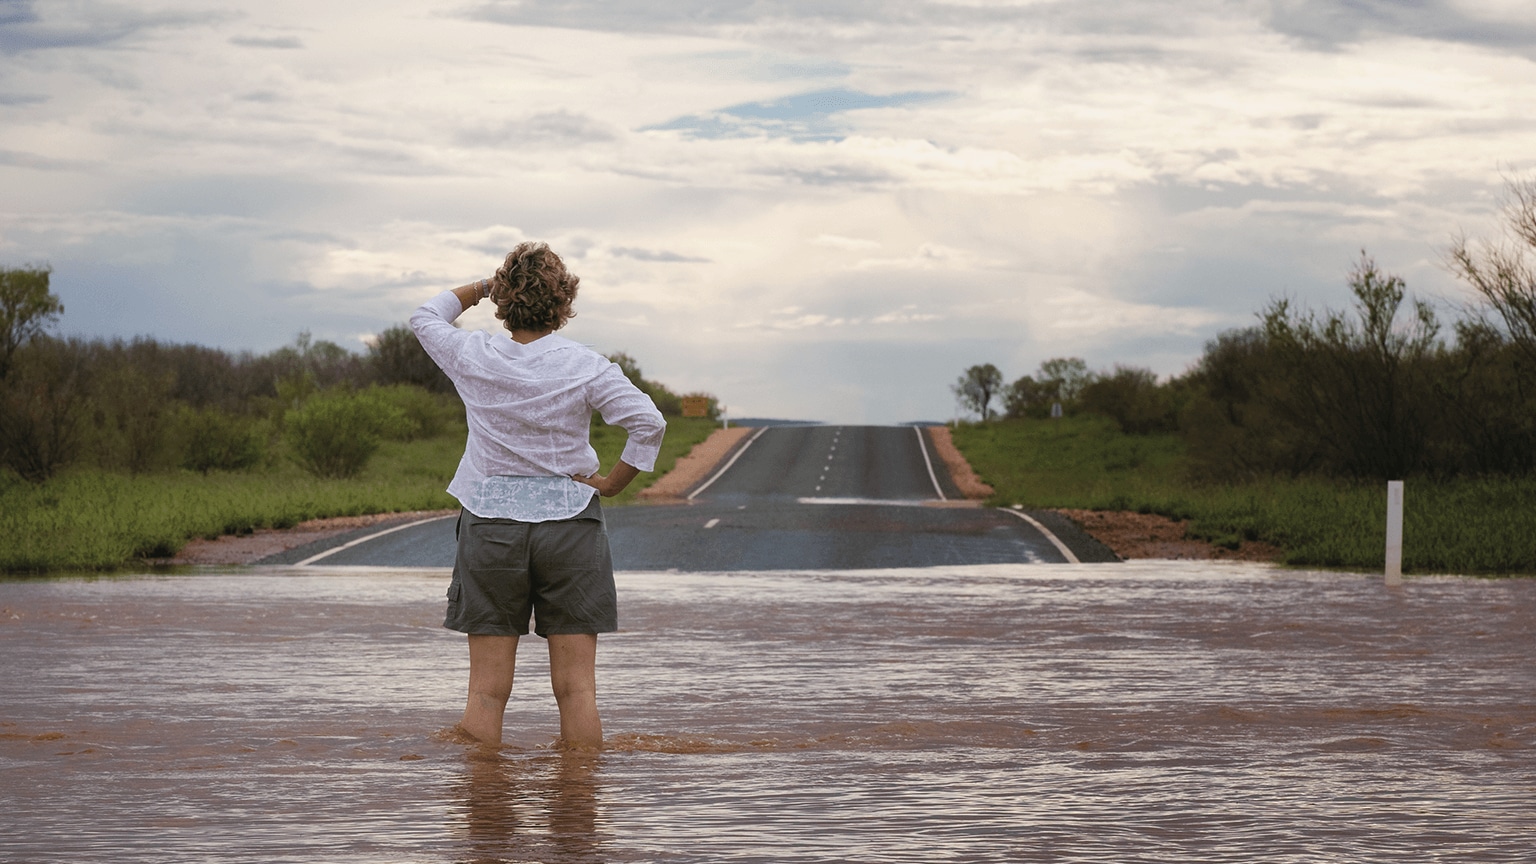 Image of a woman standing in flood waters, looking at a road